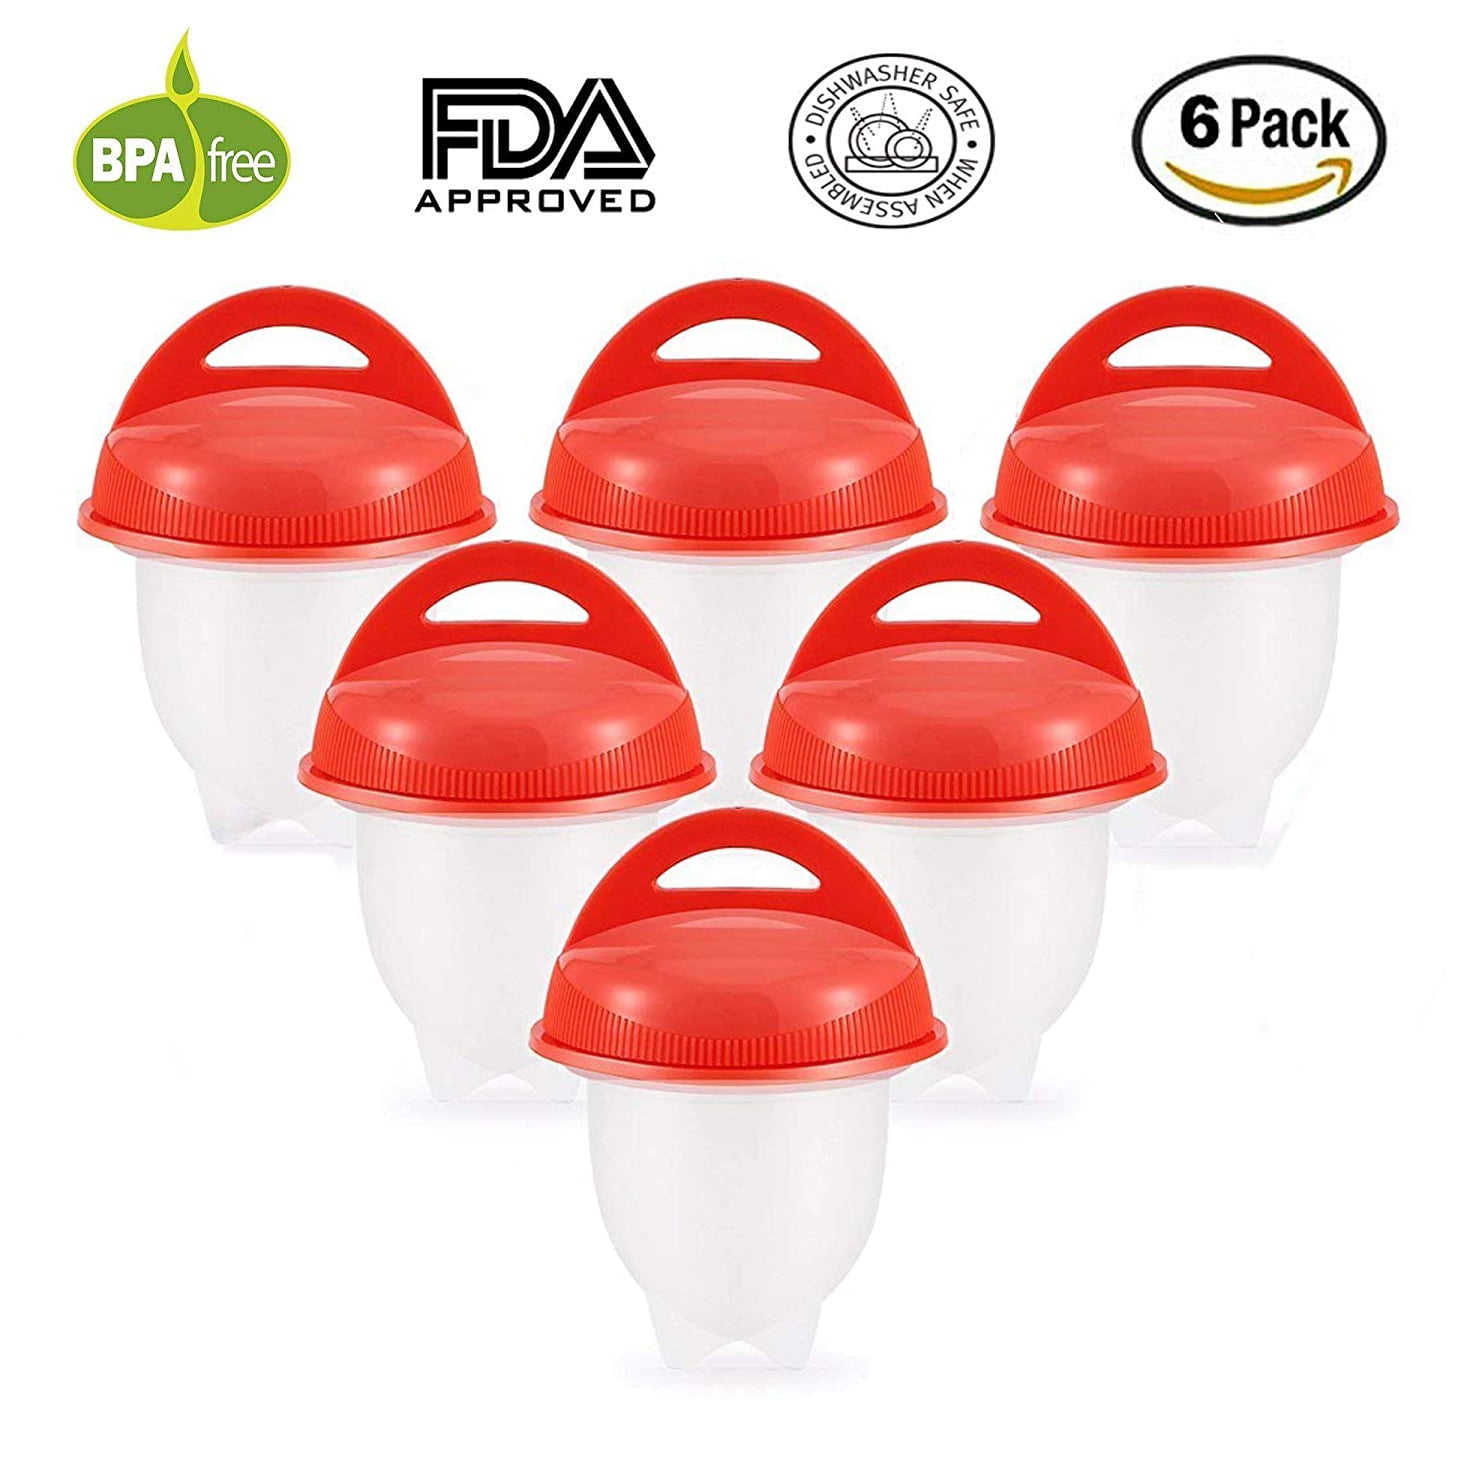 6Pcs Silicone Hard Boiled Egg Boiler Cups Cooker Poacher Steamer without Shell 